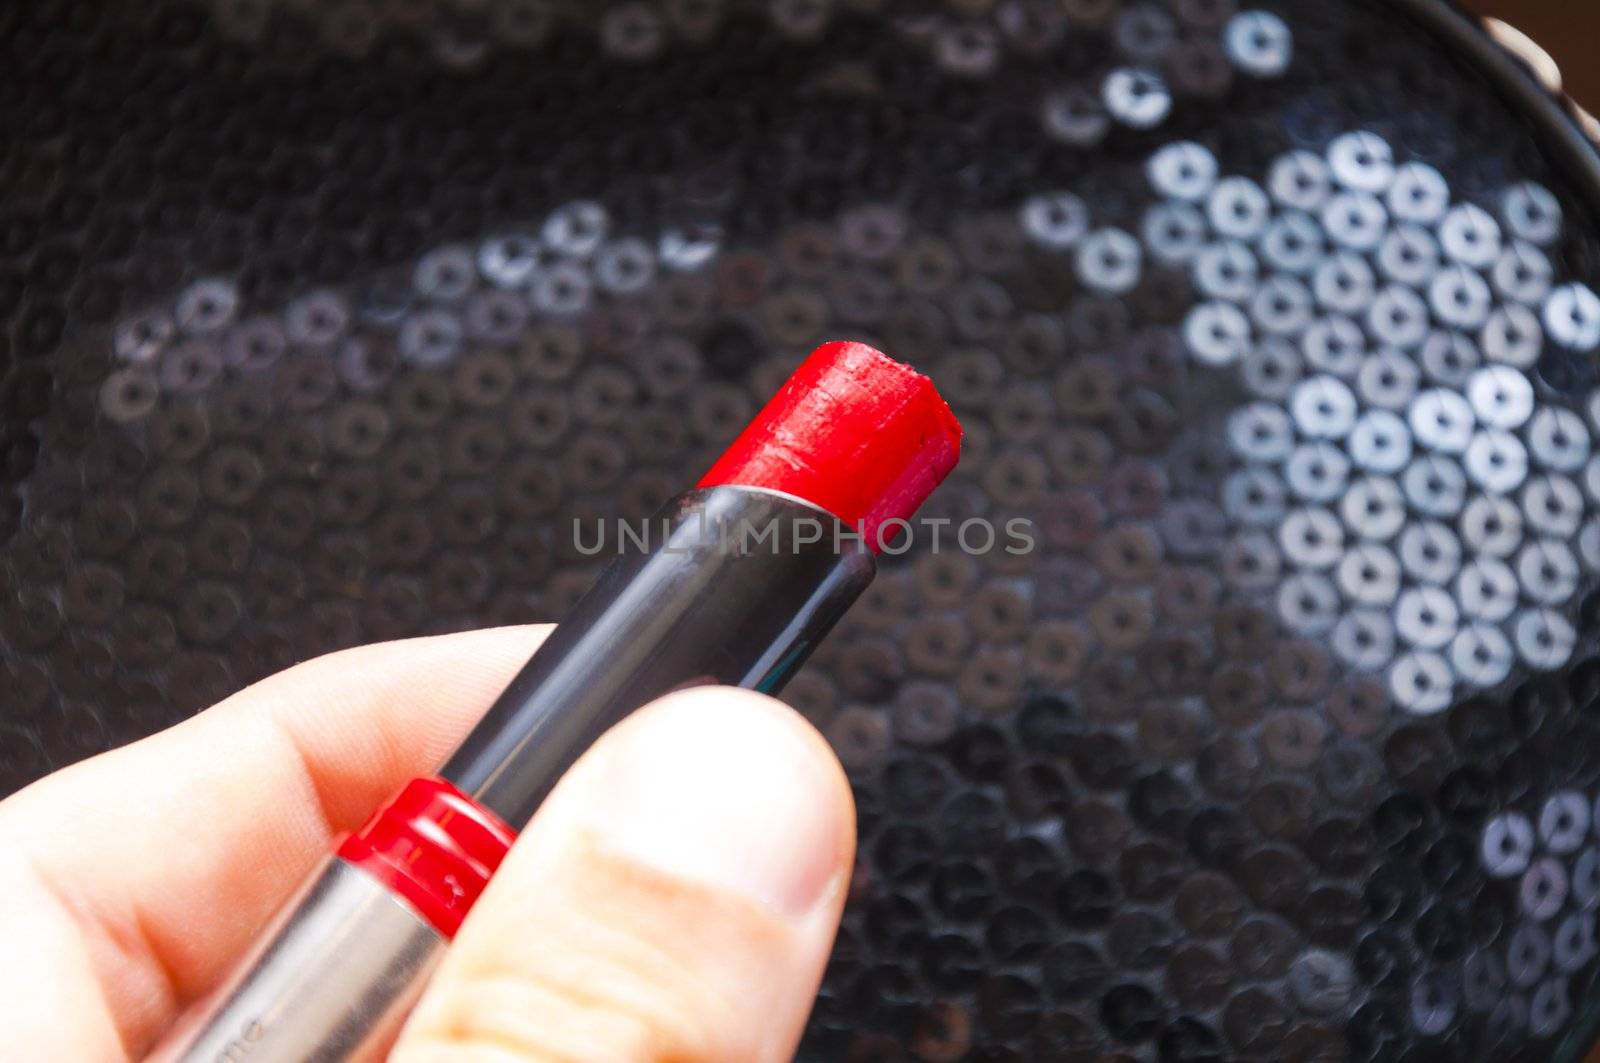 An image of red lipstick in hand